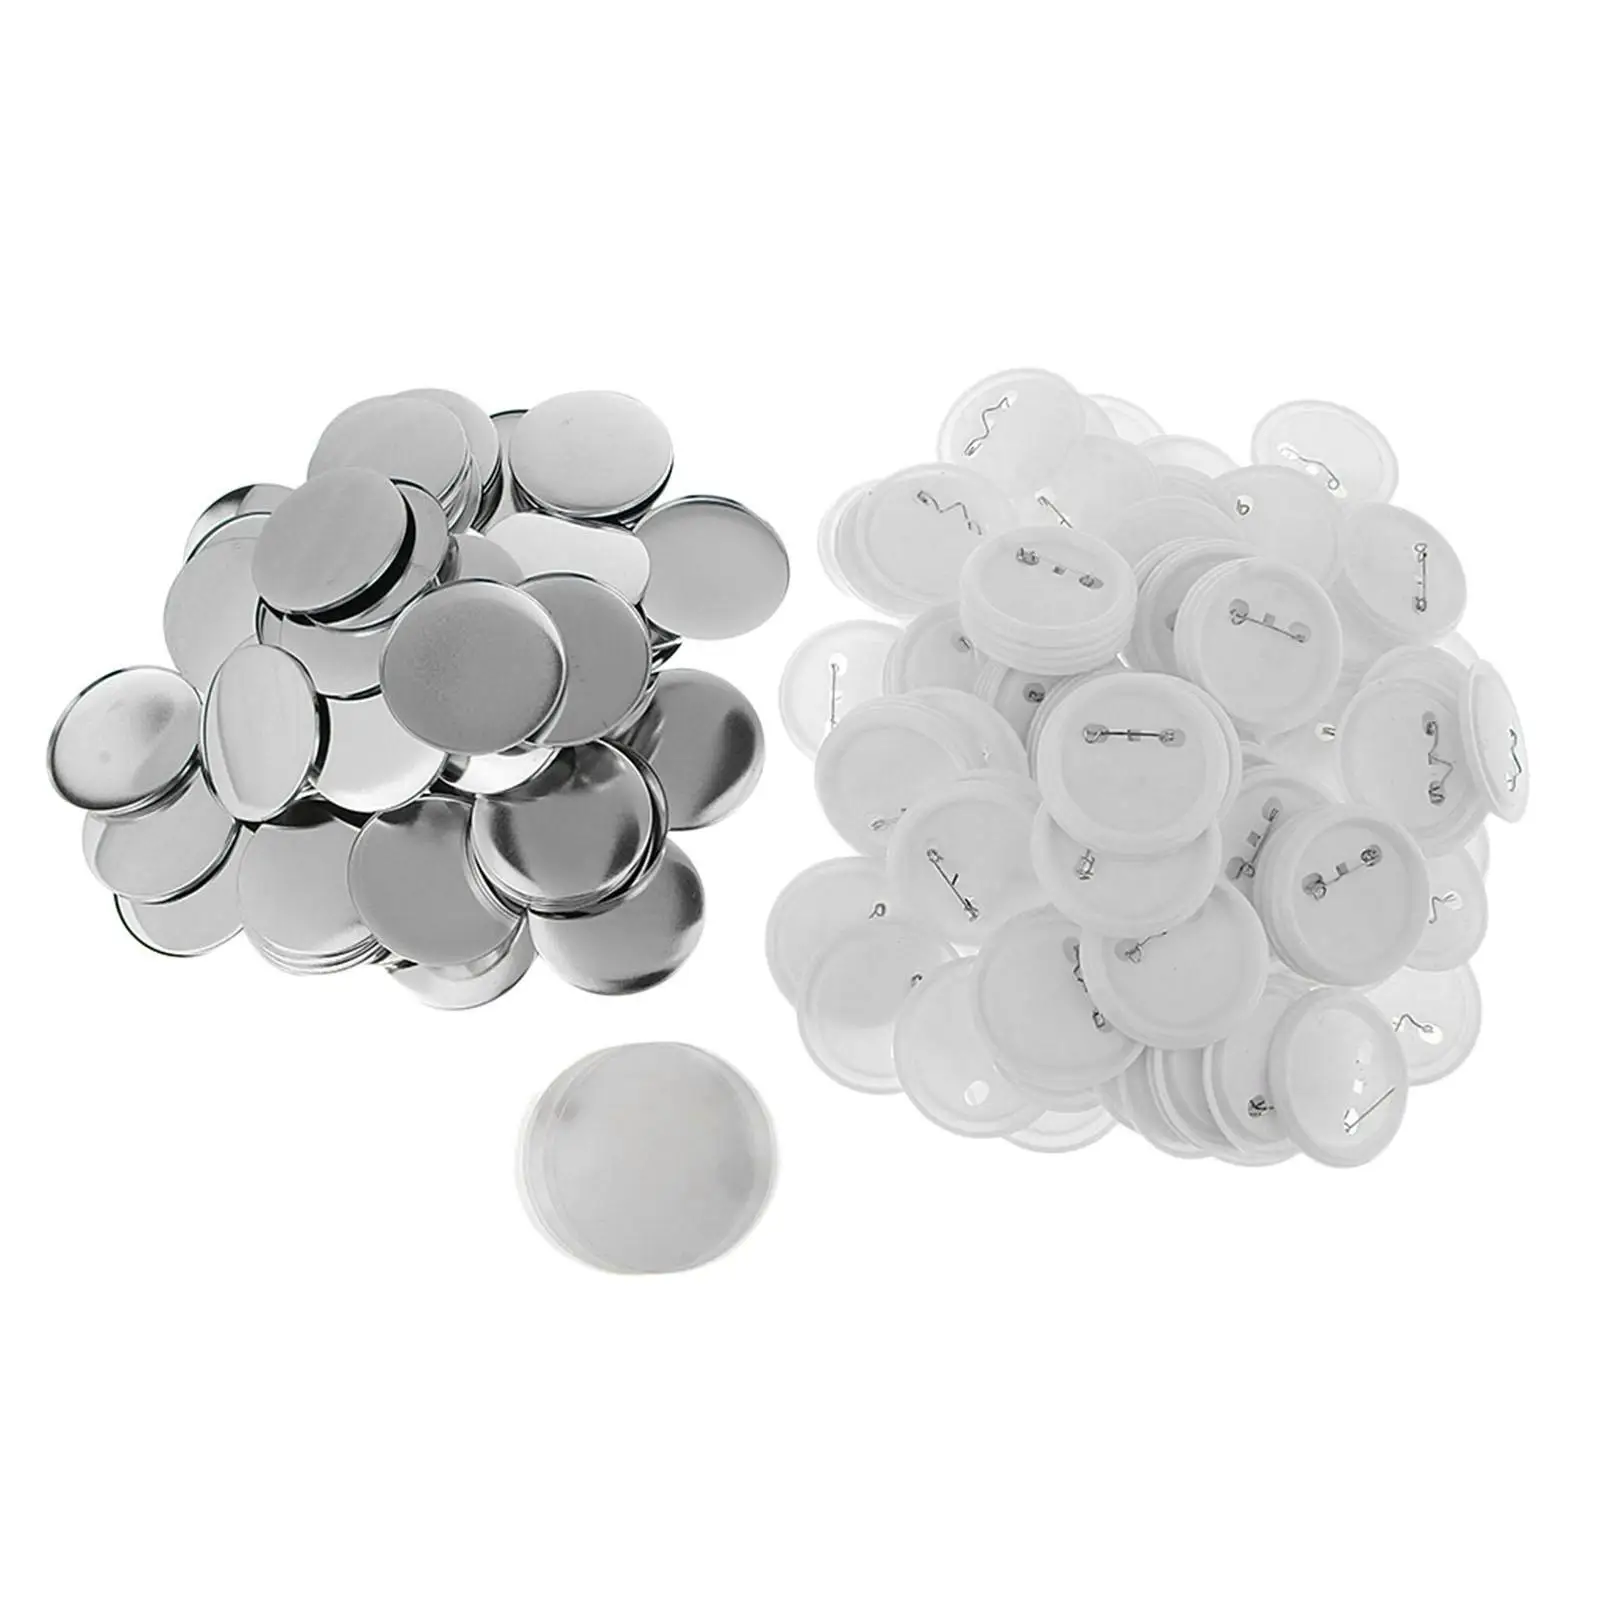 100 Sets Blank Button Making Supplies Round Badge Pin Button Parts for Button Maker Machine with Metal Cover, Base, Film